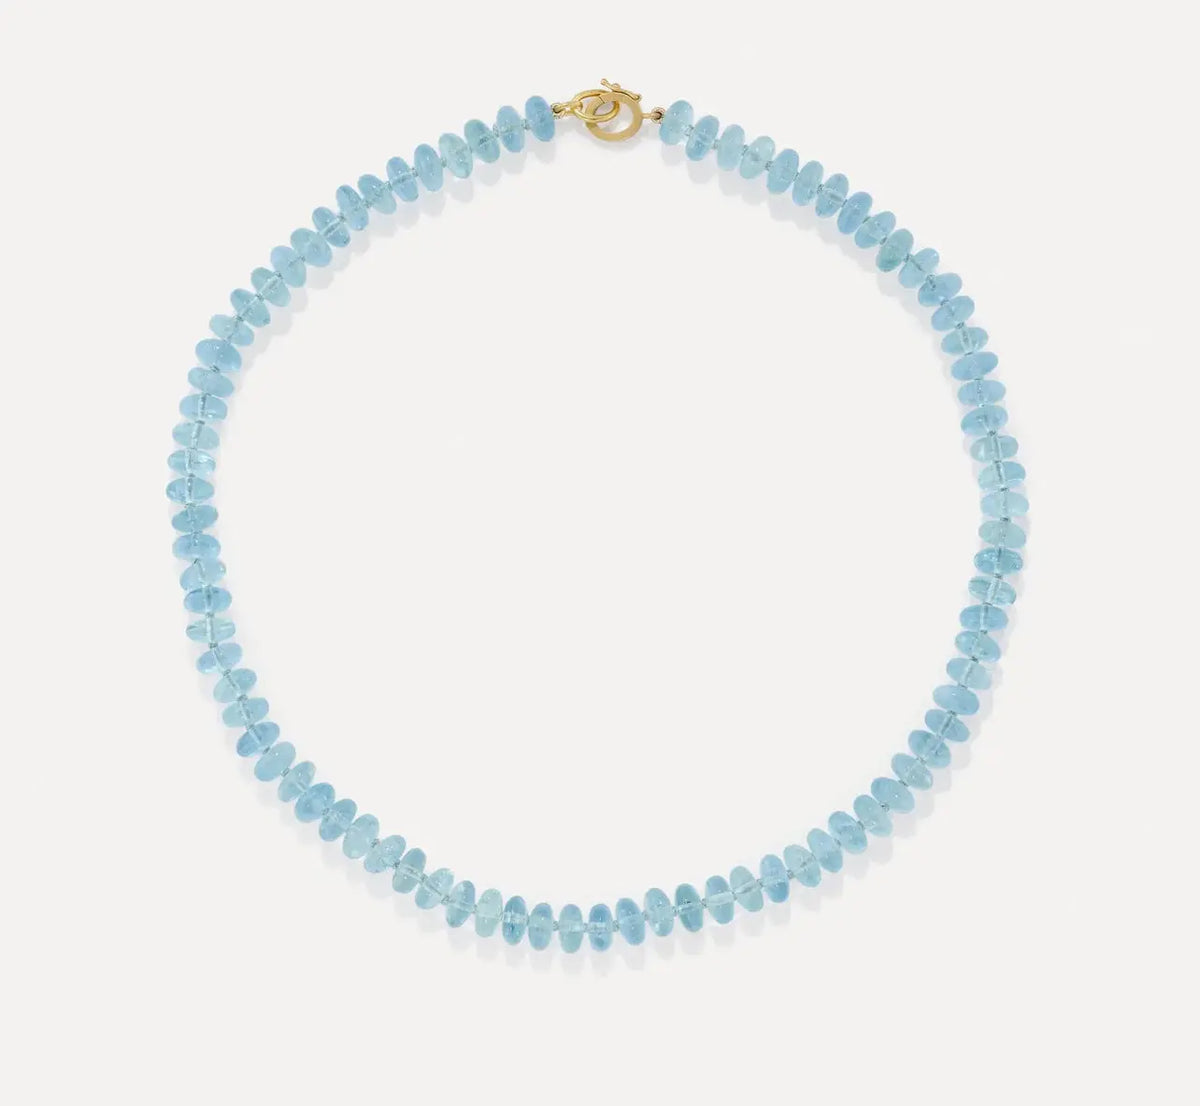 Irene Neuwirth&#39;s beaded candy collection necklace in Aquamarine. This is piece is hand string and knotted between each bead. The clasp is 18k yellow gold and the length is 16 inches.